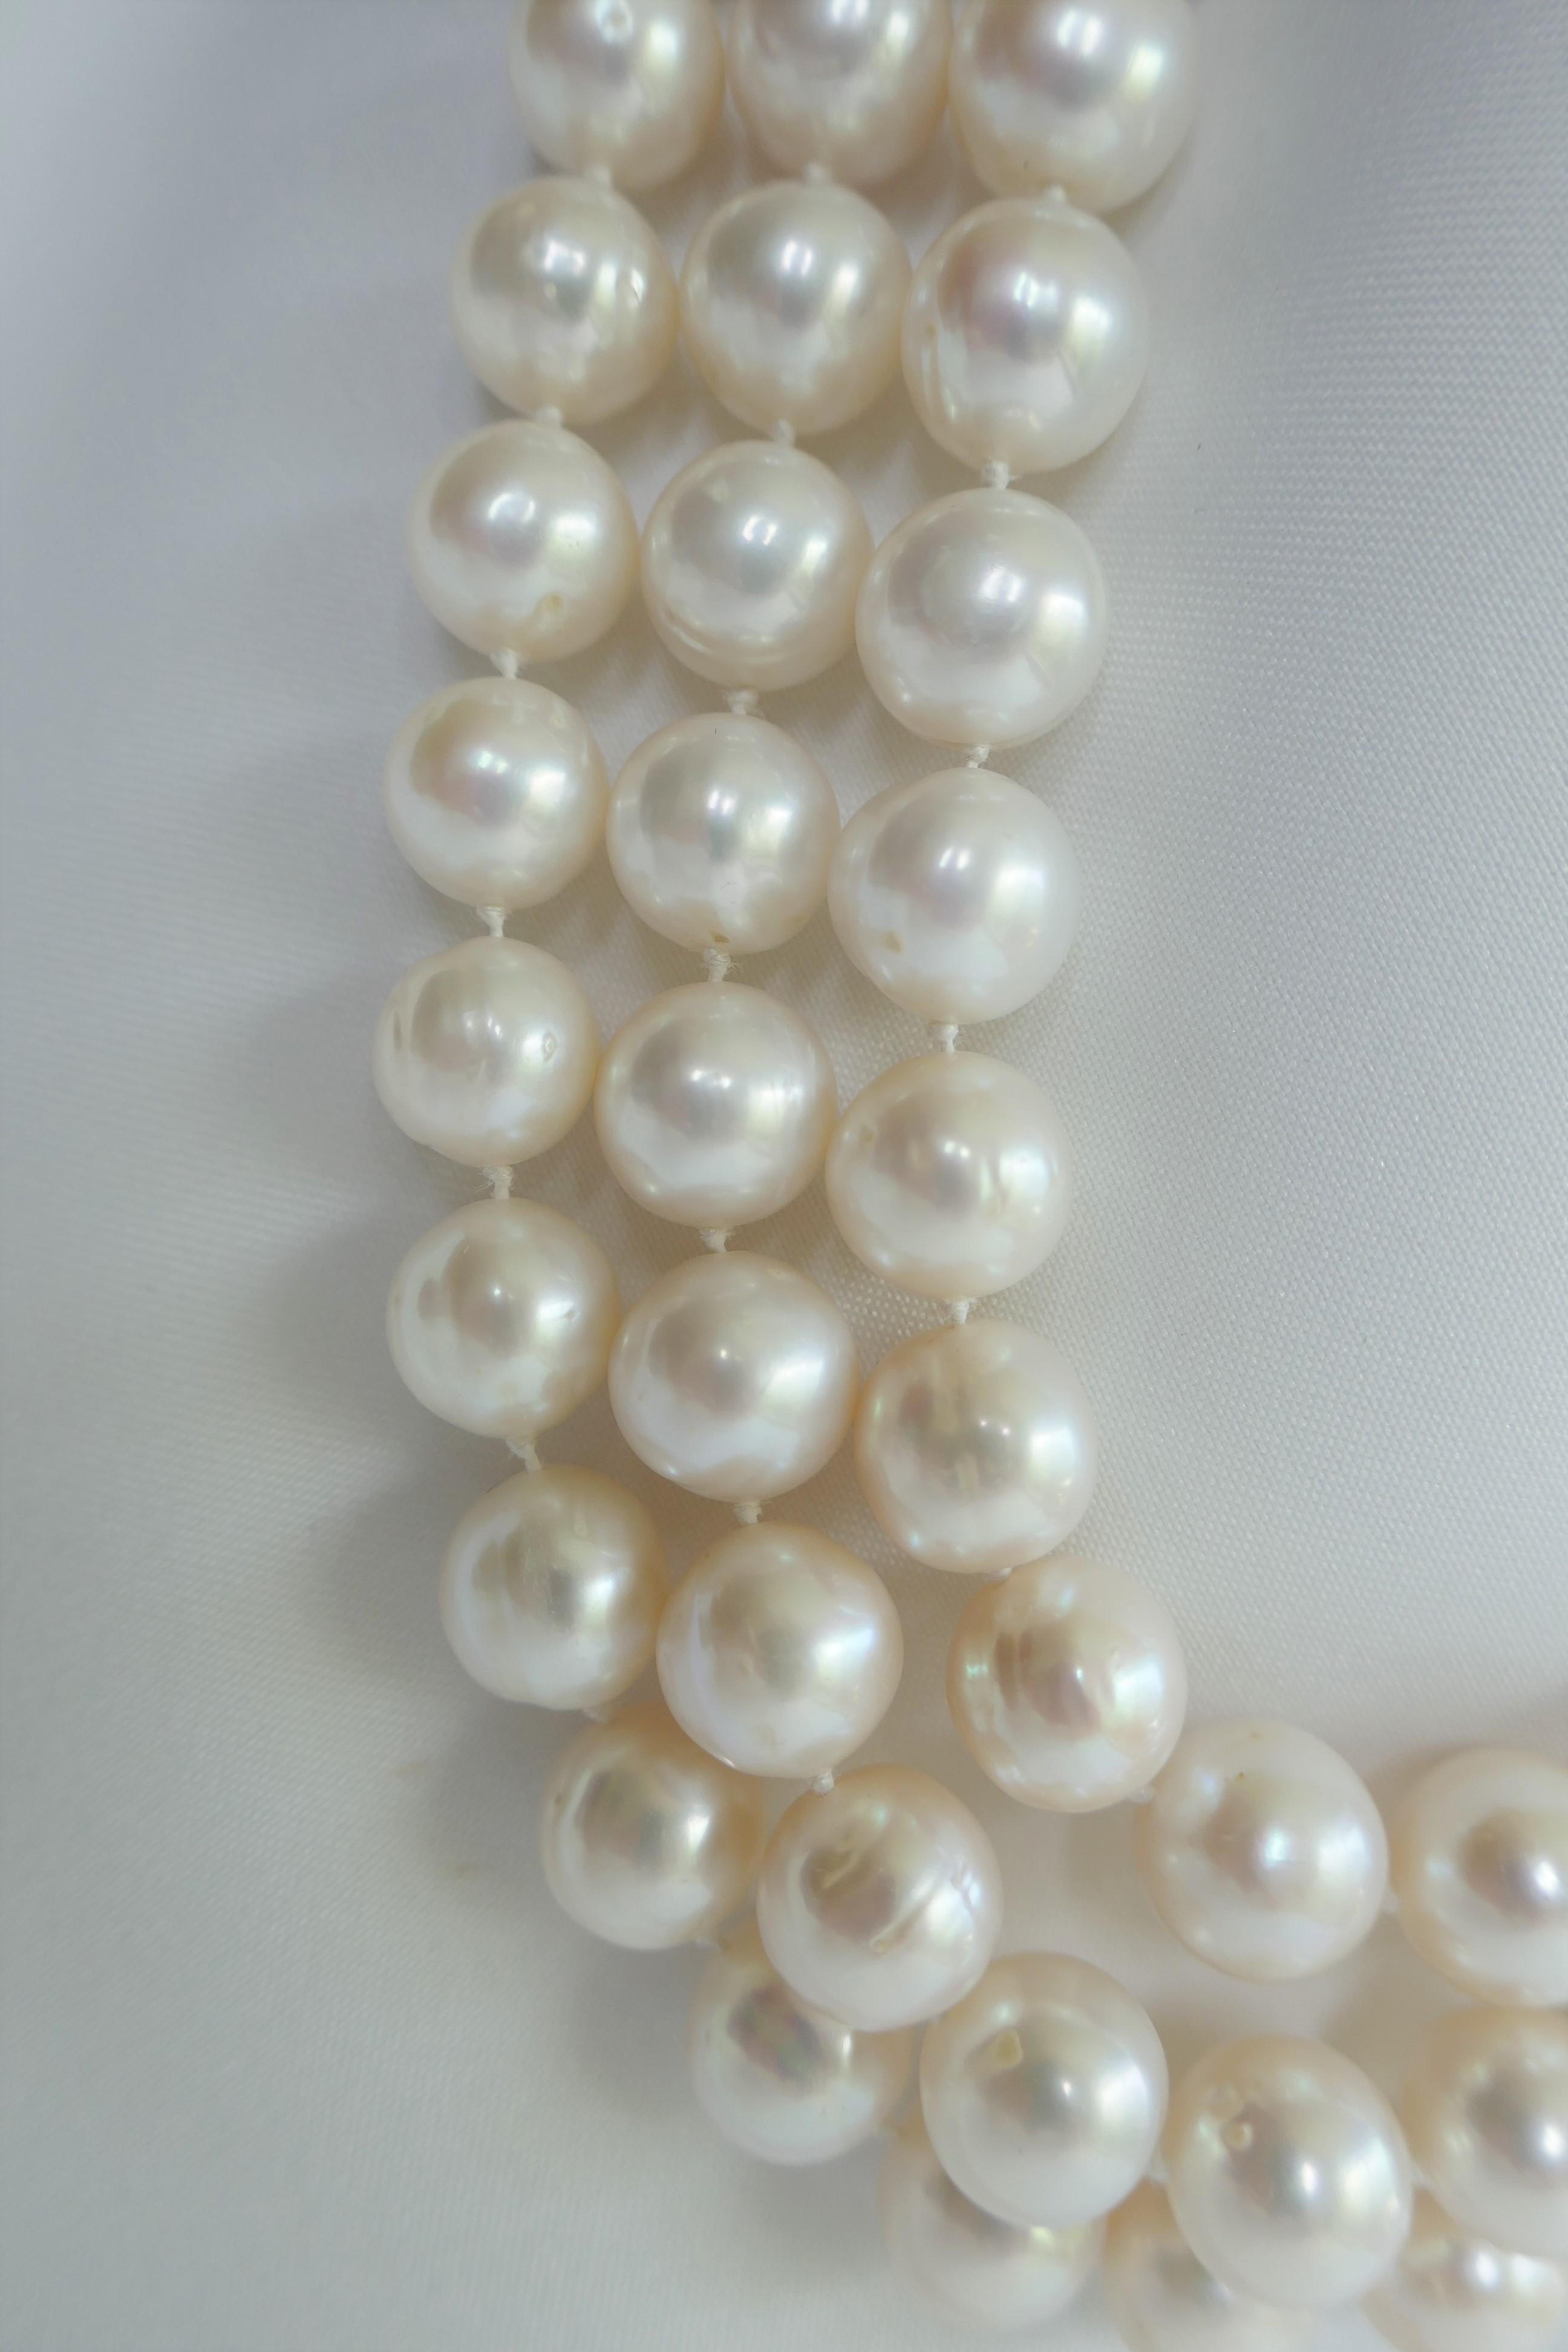 This three strand white cultured pearl necklace sits beautifully on the neck. The pearls are 10-11mm,  have great luster and little blemished. The necklace is individually knotted on silk thread. Although, a classical design the size make it more